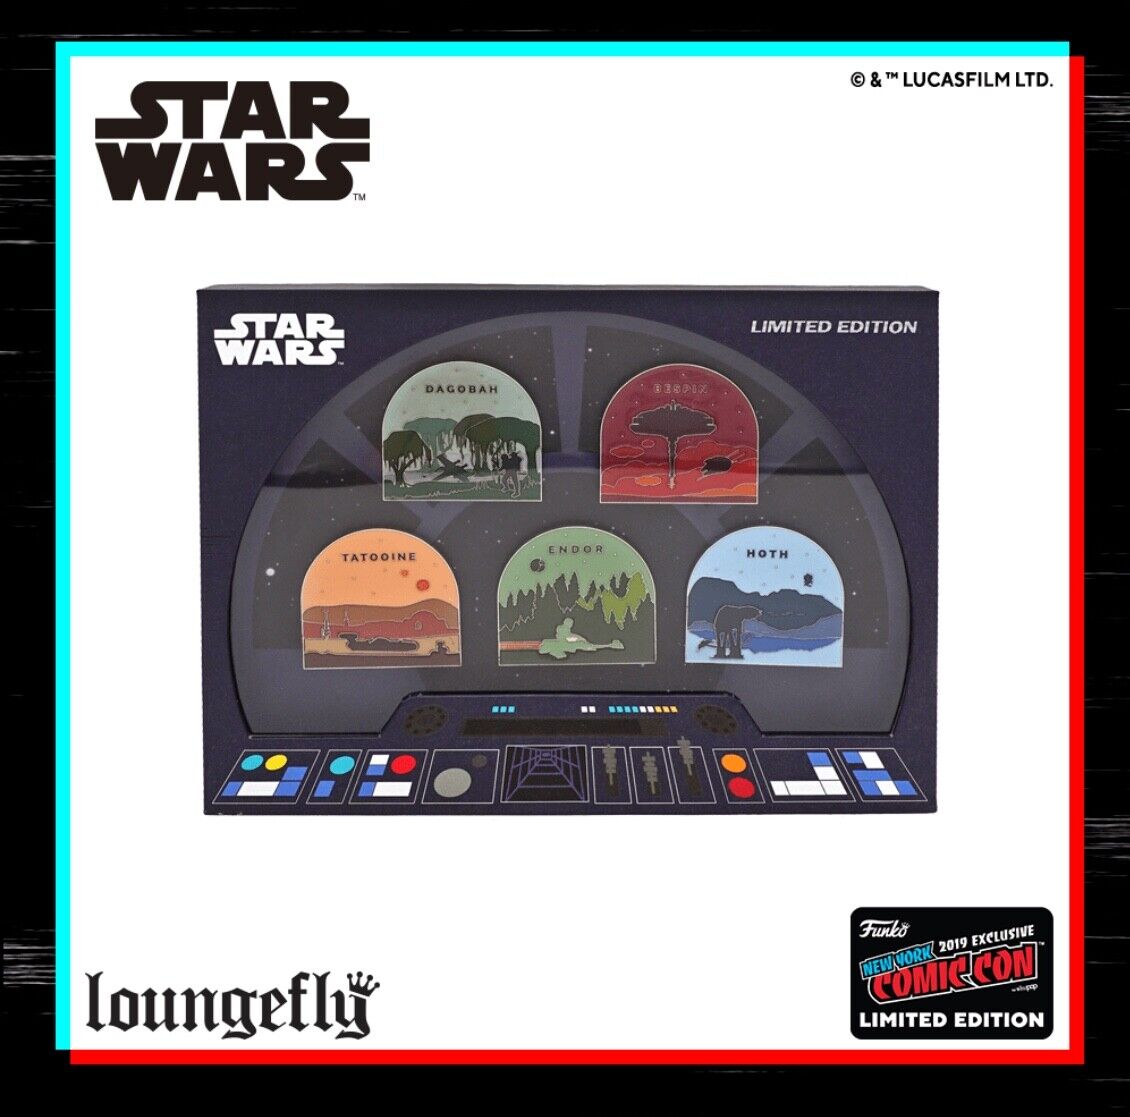 2019 NYCC LOUNGEFLY EXCLUSIVE STAR WARS PLANETS 5 PIN SET RARE /1000 LlIMITED